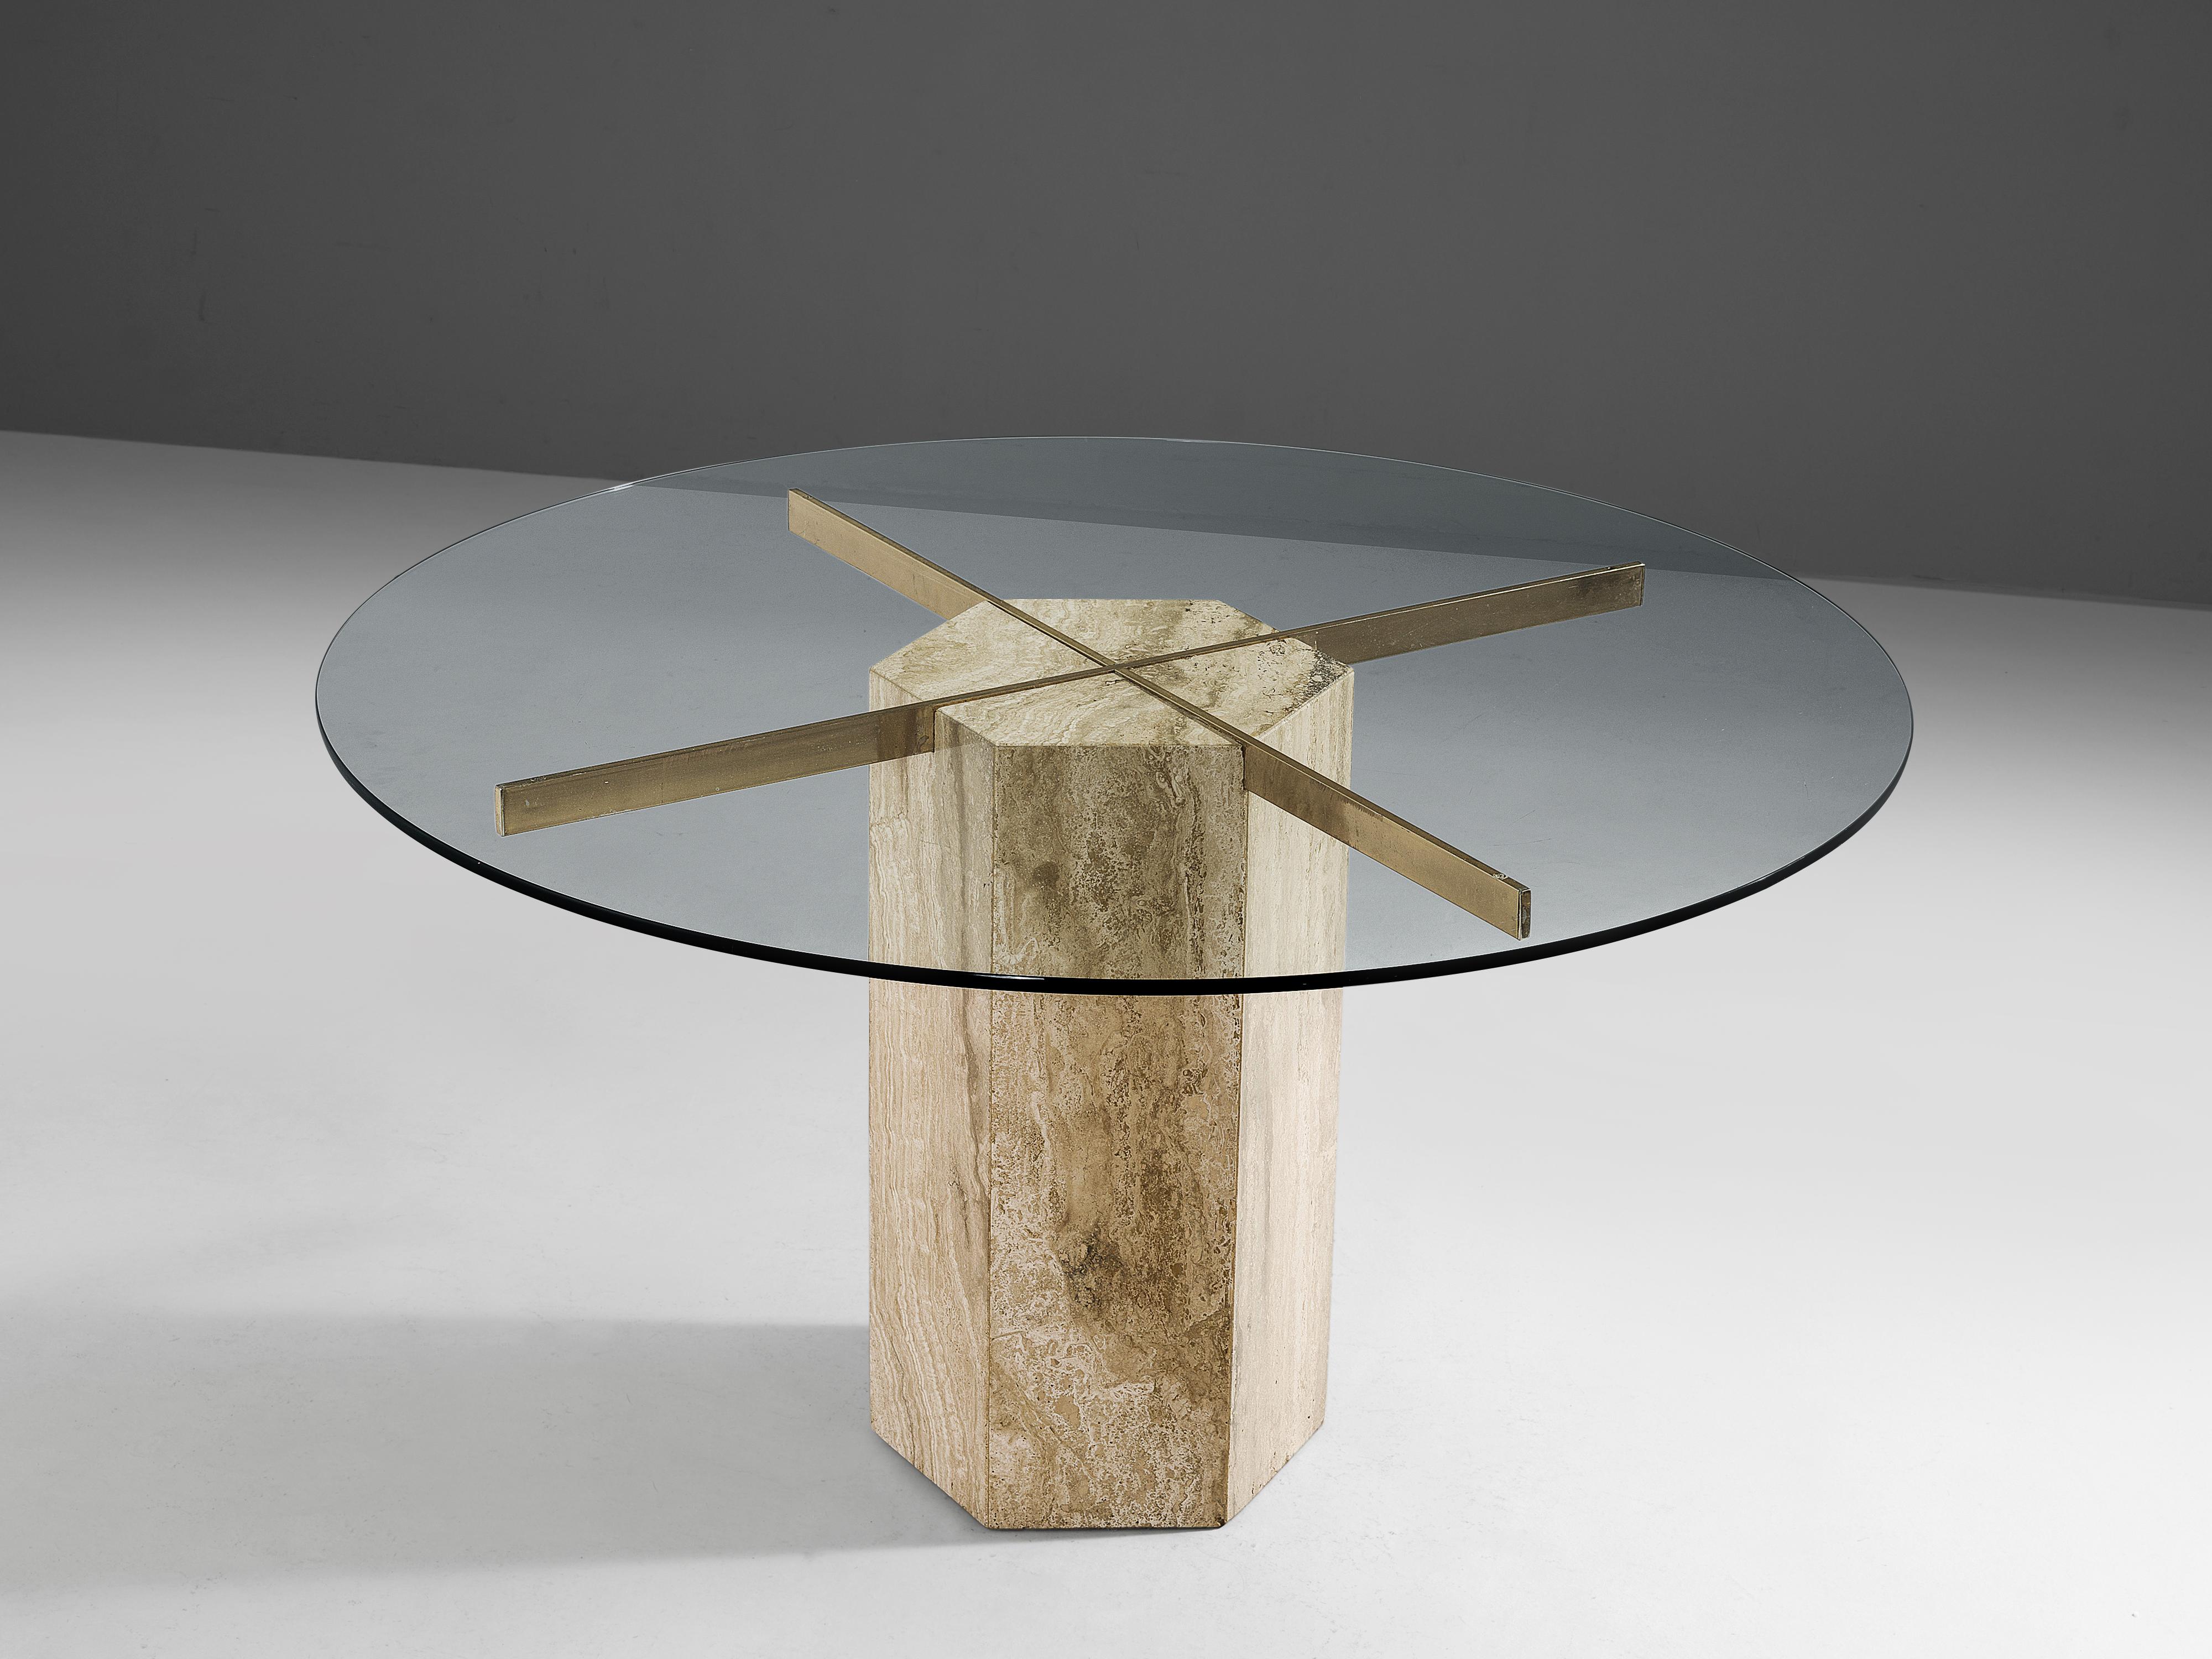 Dining table, travertine, glass, brass, Italy, 1970s

Luxurious Italian dining table with a polygonal pedestal base in travertine. Inlayed in the travertine base is a large brass cross that supports the round glass top. Due the clear glass, the